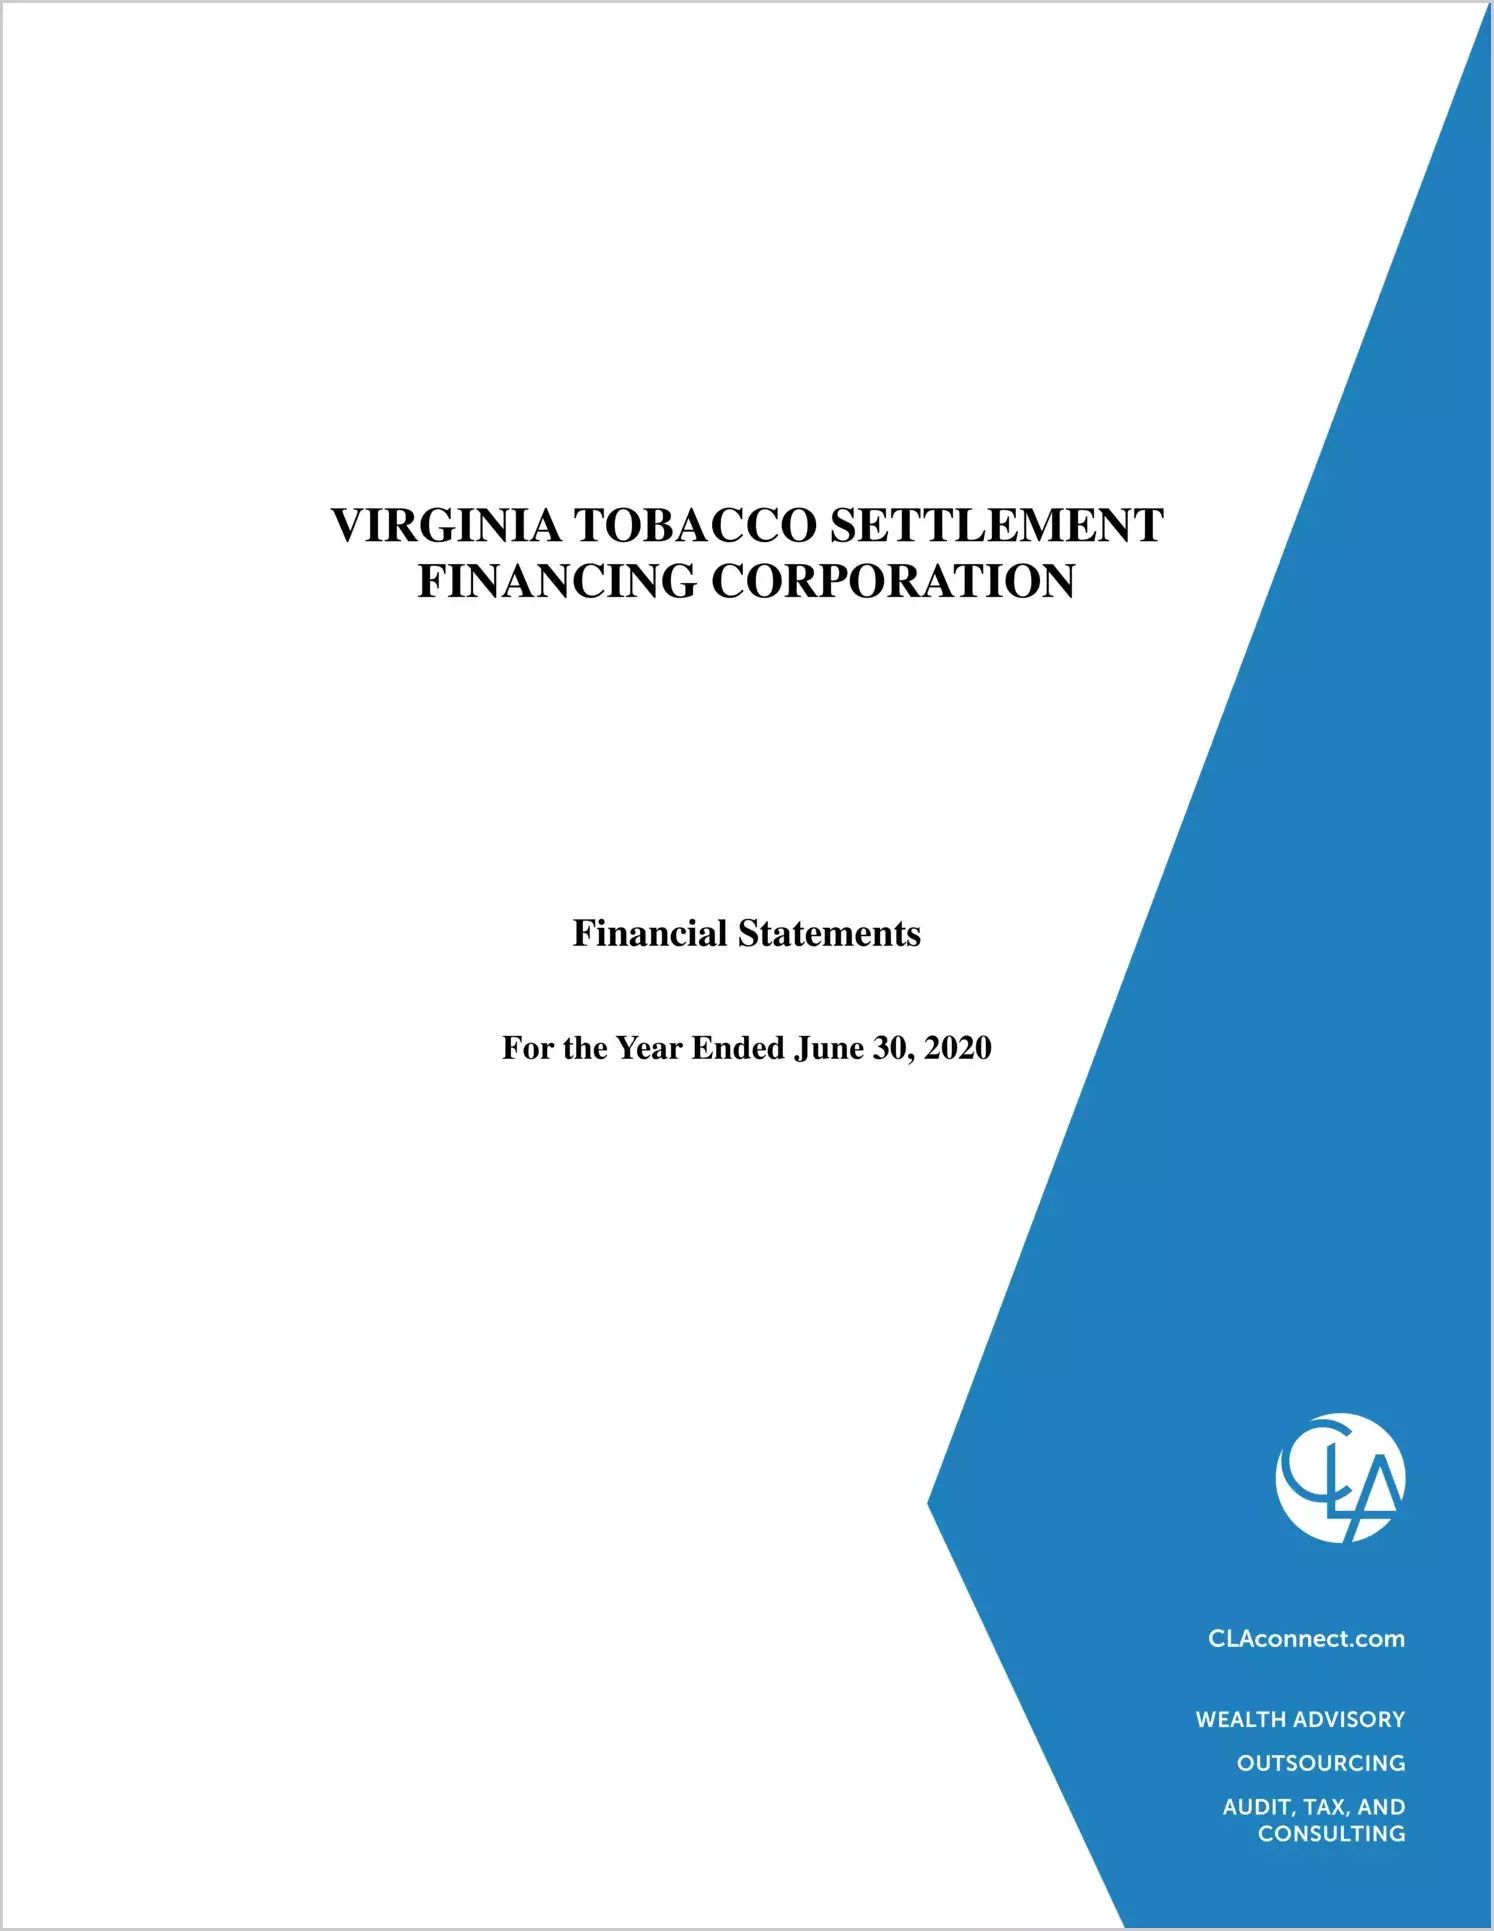 Virginia Tobacco Settlement Financing Corporation for the year ended June 30, 2020